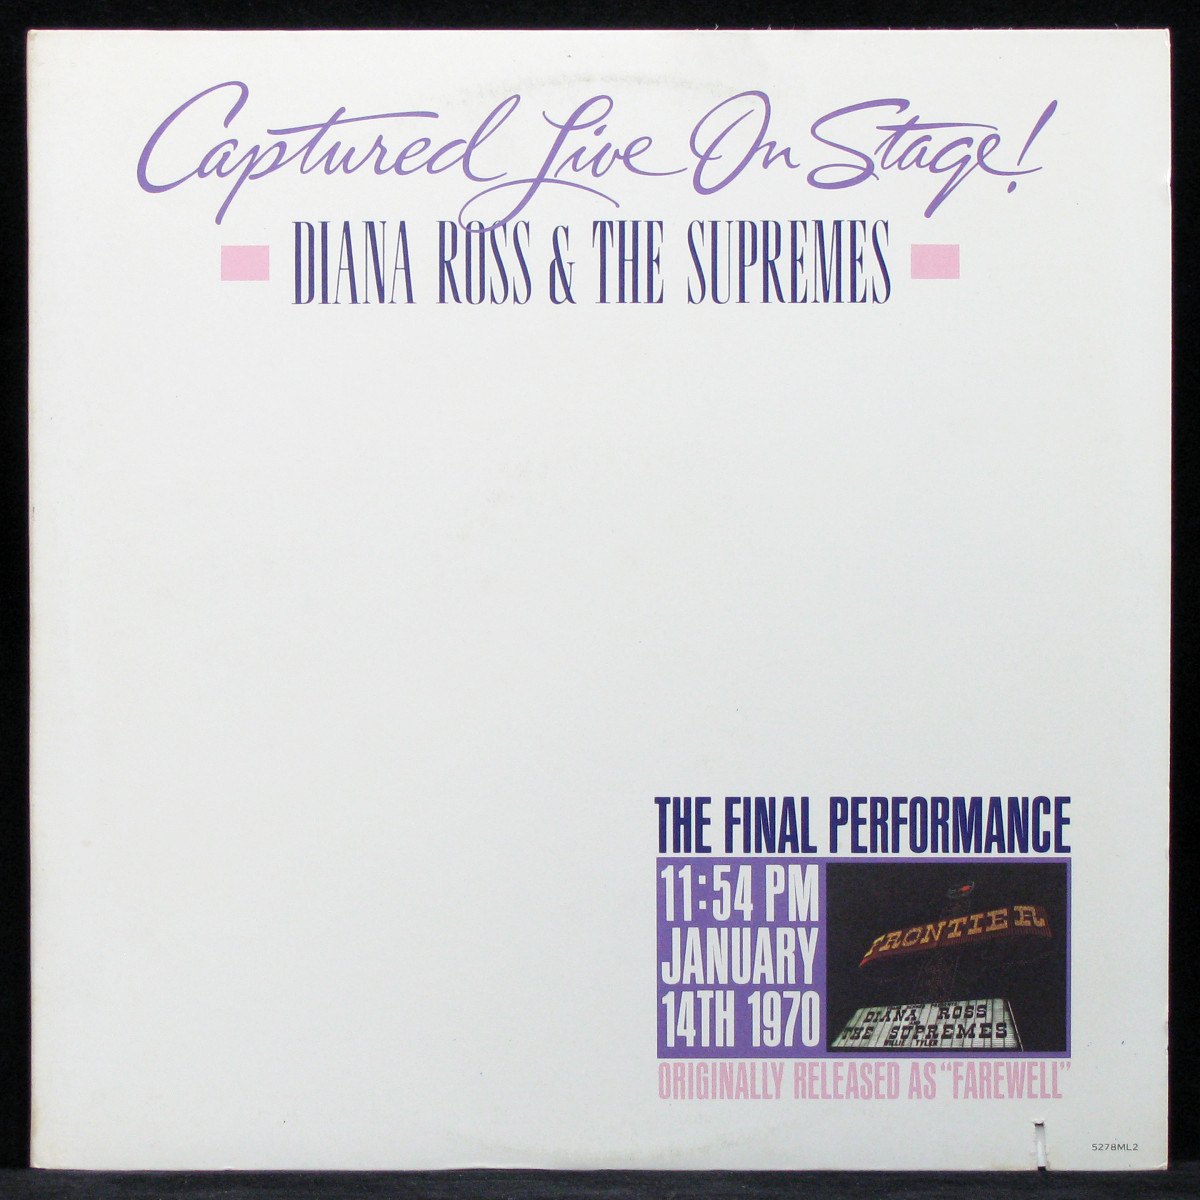 LP Diana Ross & The Supremes — Captured Live On Stage! (2LP) фото